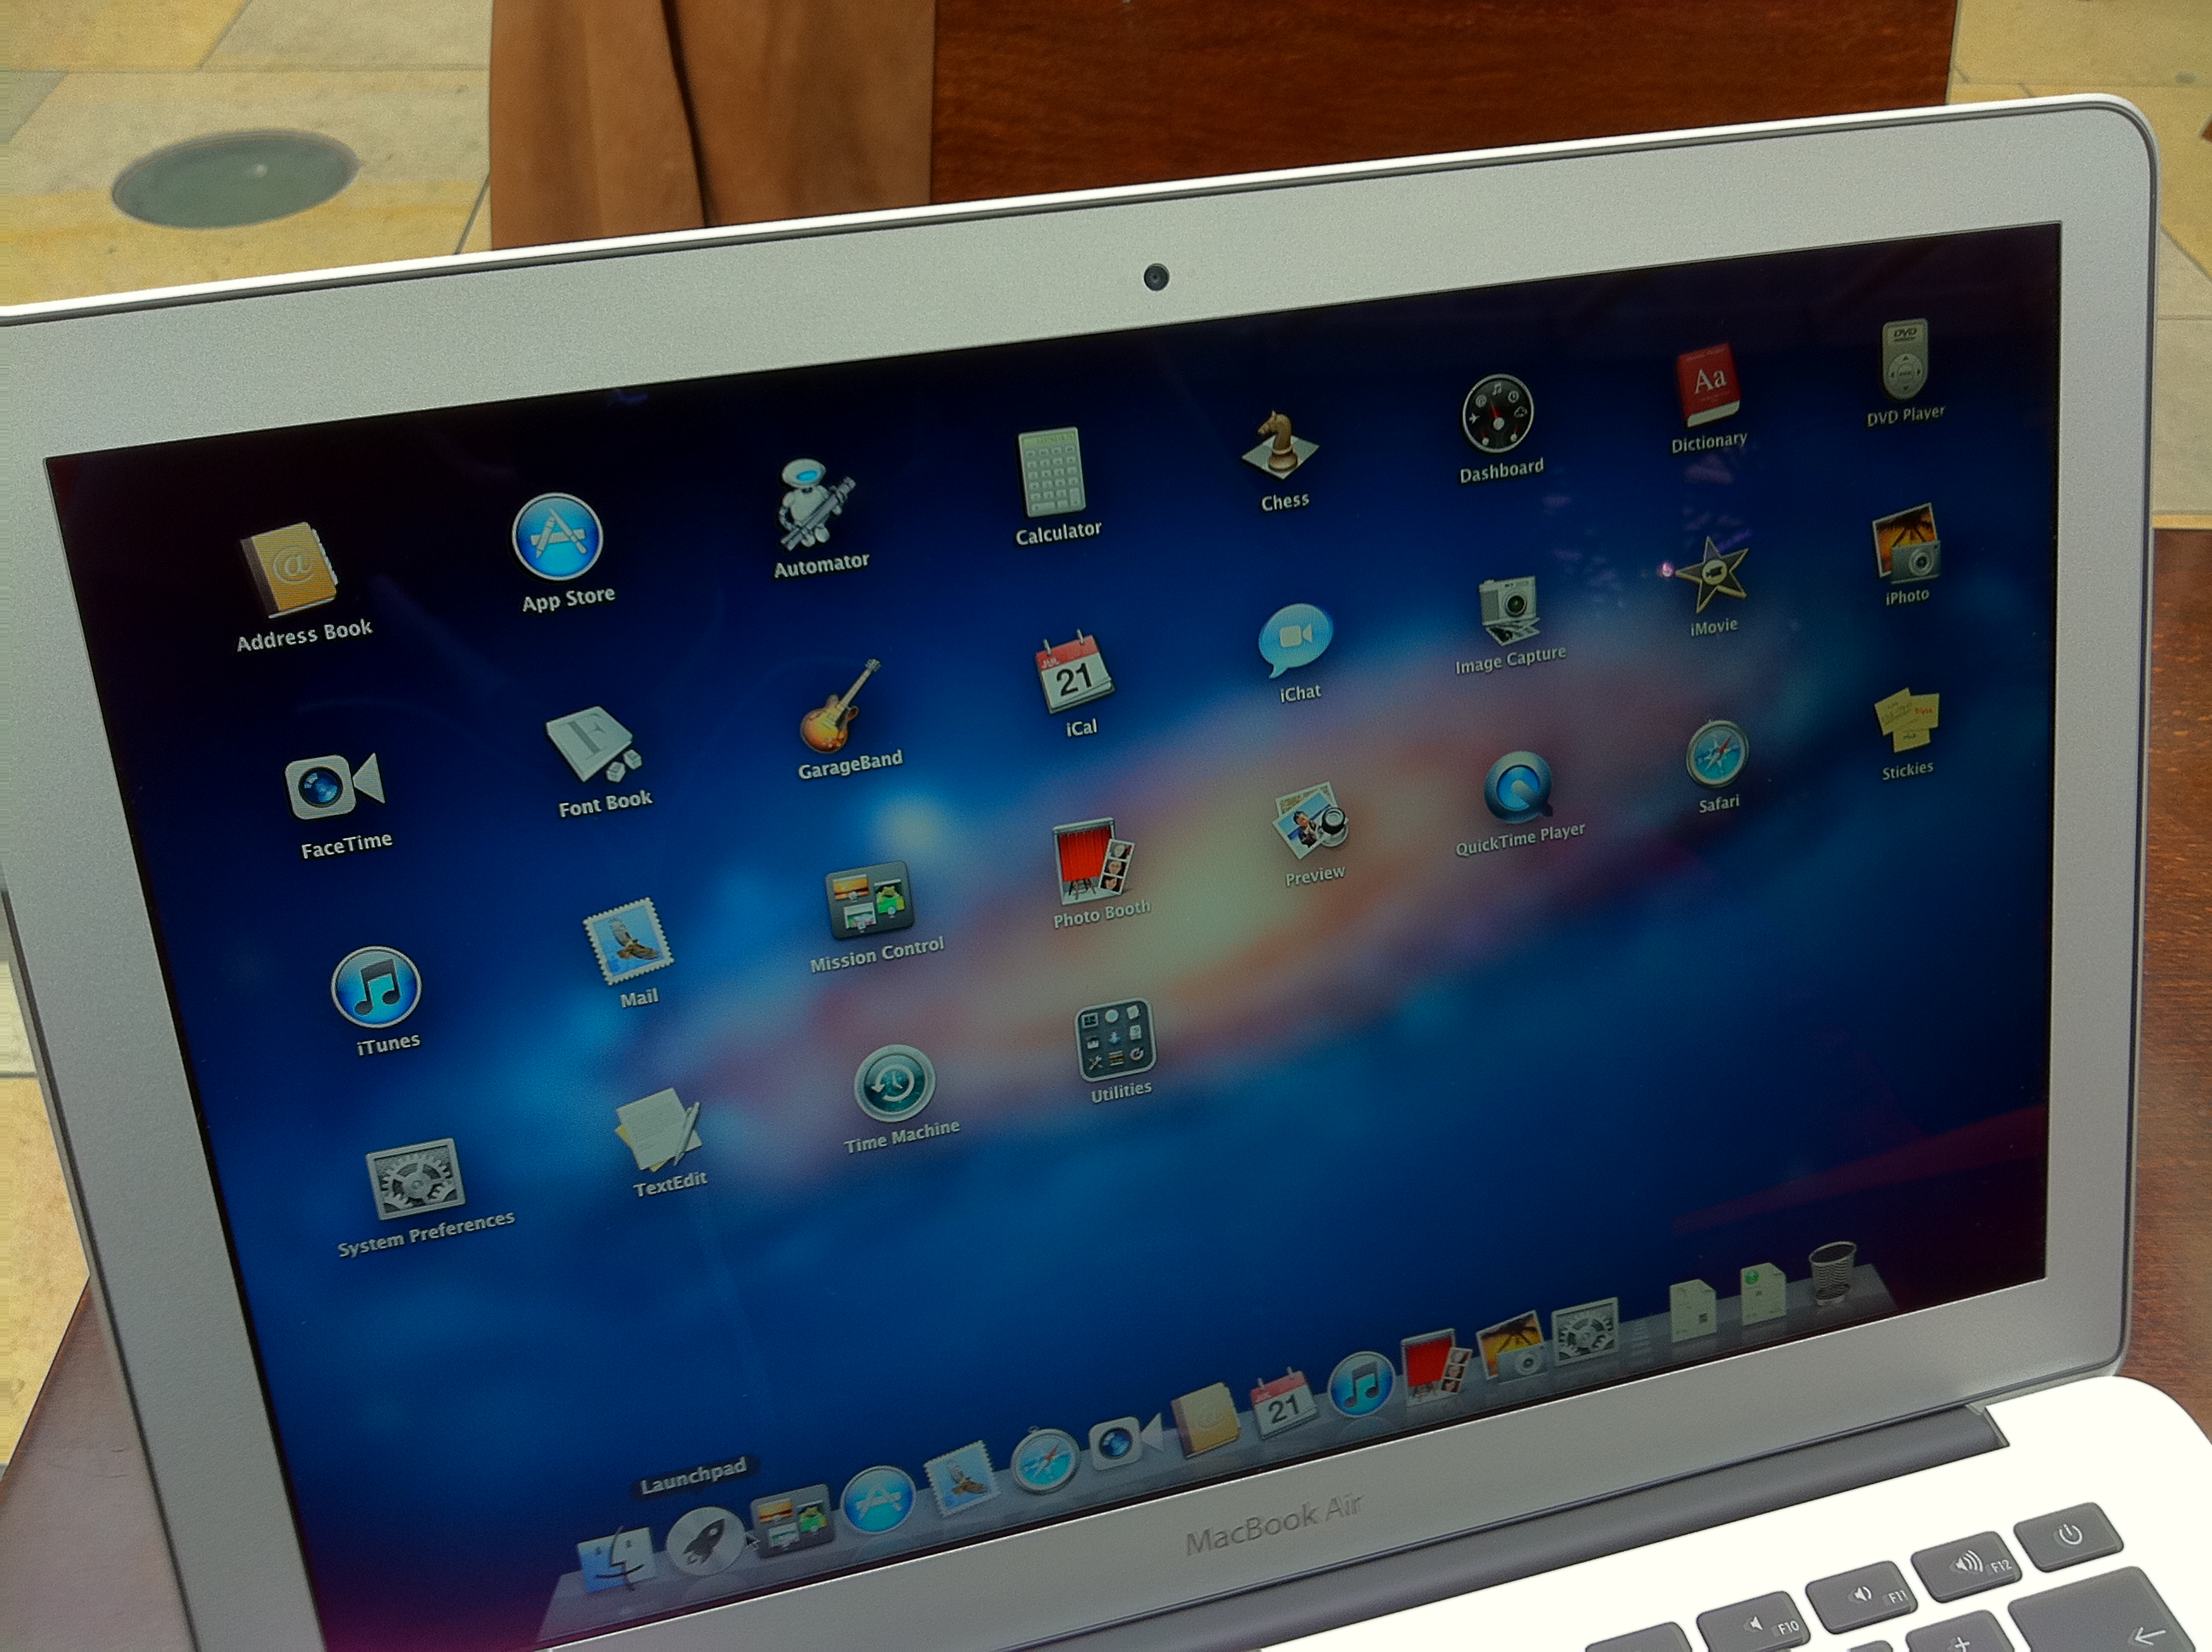 Update mac os x to latest version